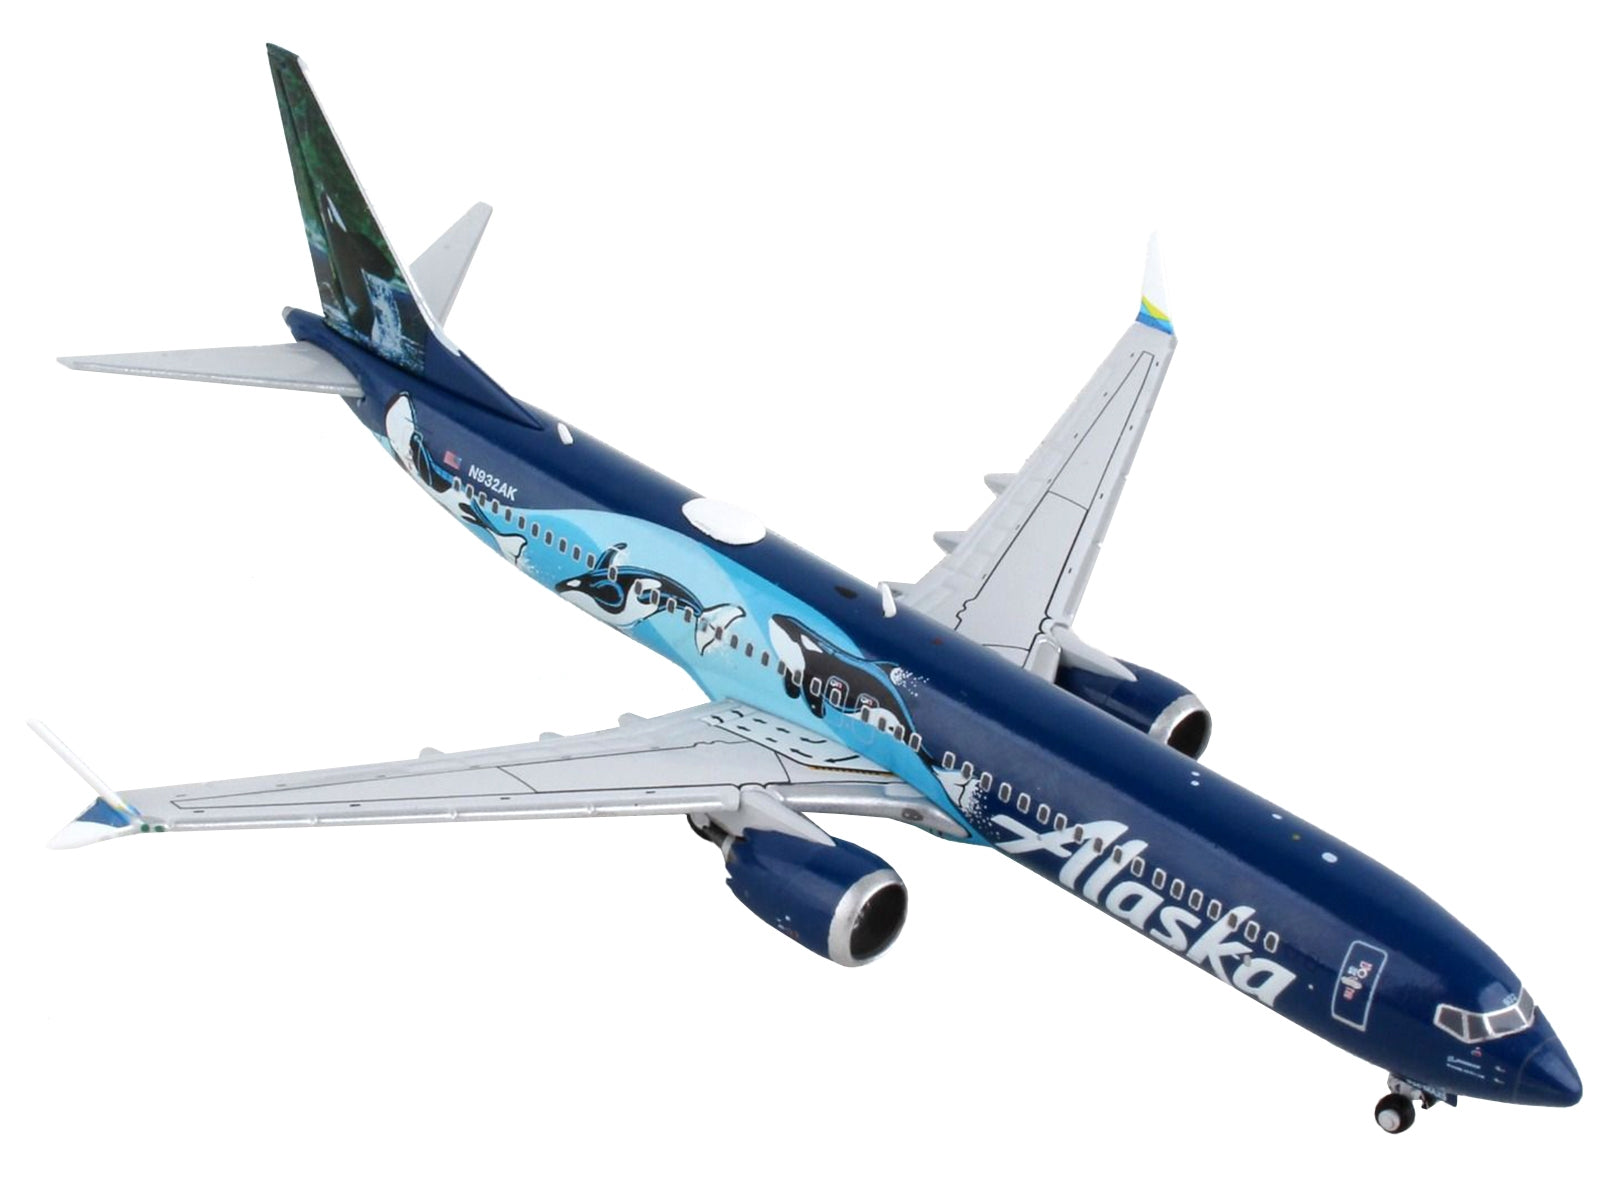 Boeing 737 MAX 9 Commercial Aircraft "Alaska Airlines" Blue with Orca Graphics 1/400 Diecast Model Airplane by GeminiJets